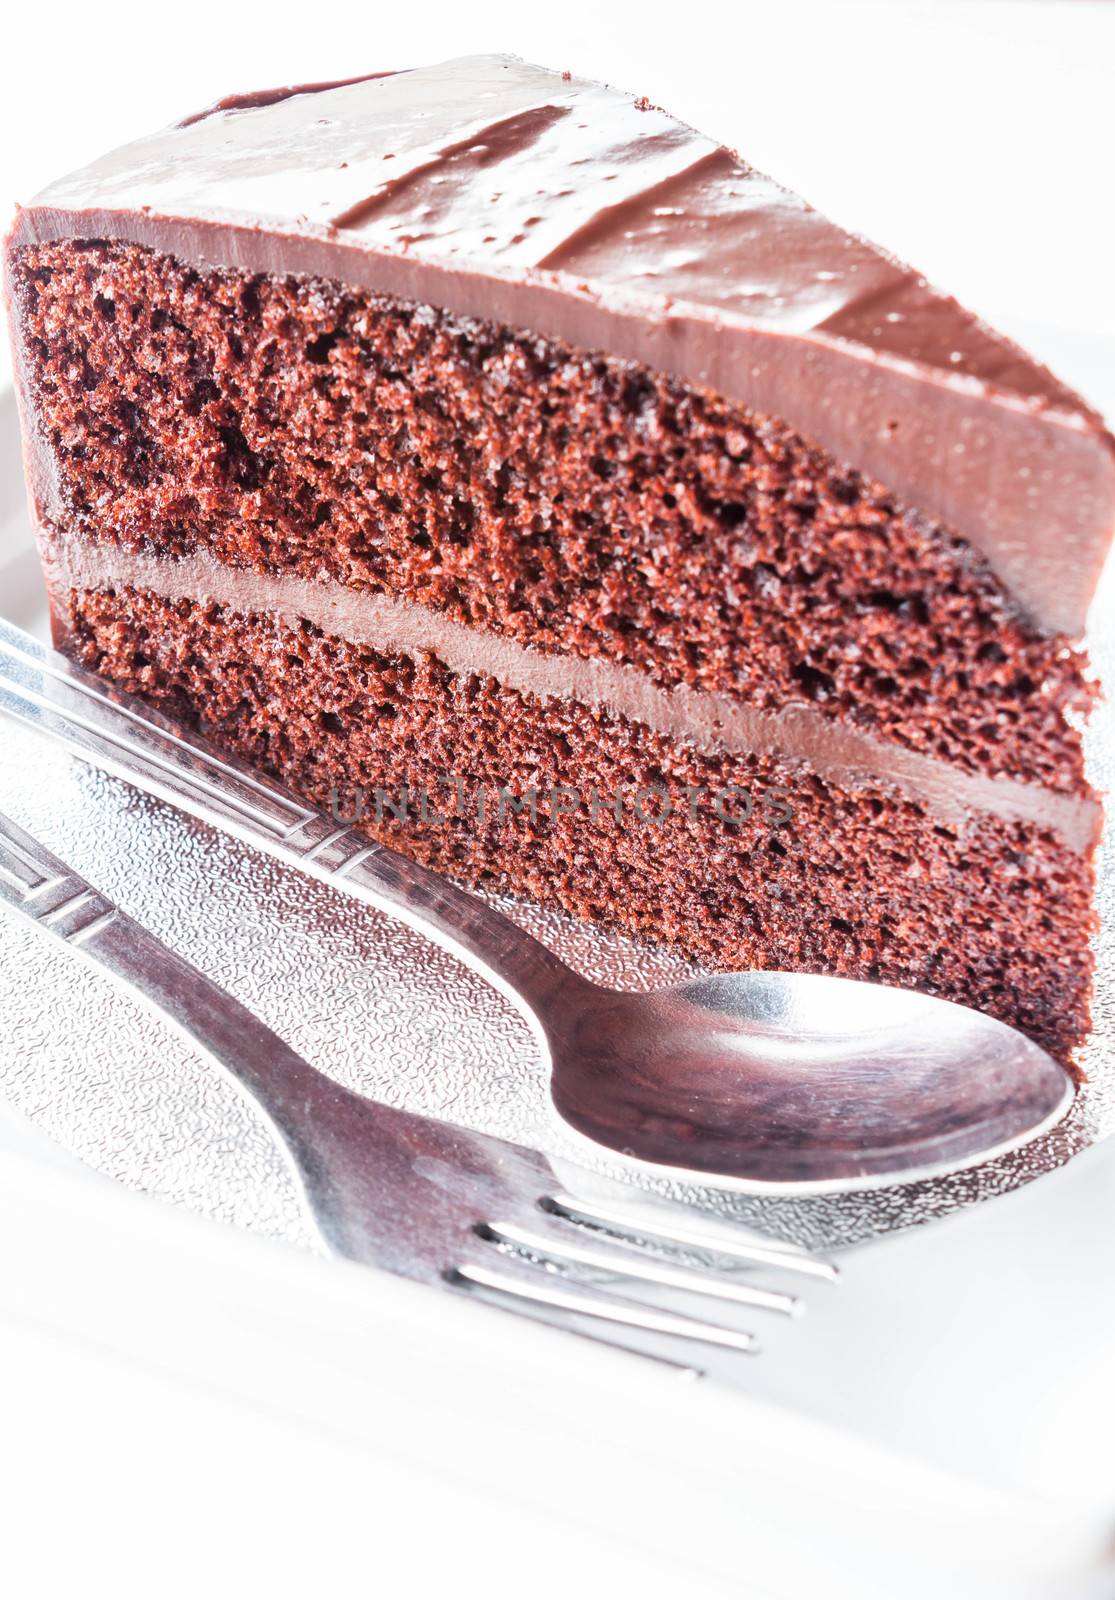 Piece of chocolate cake with spoon and fork by punsayaporn